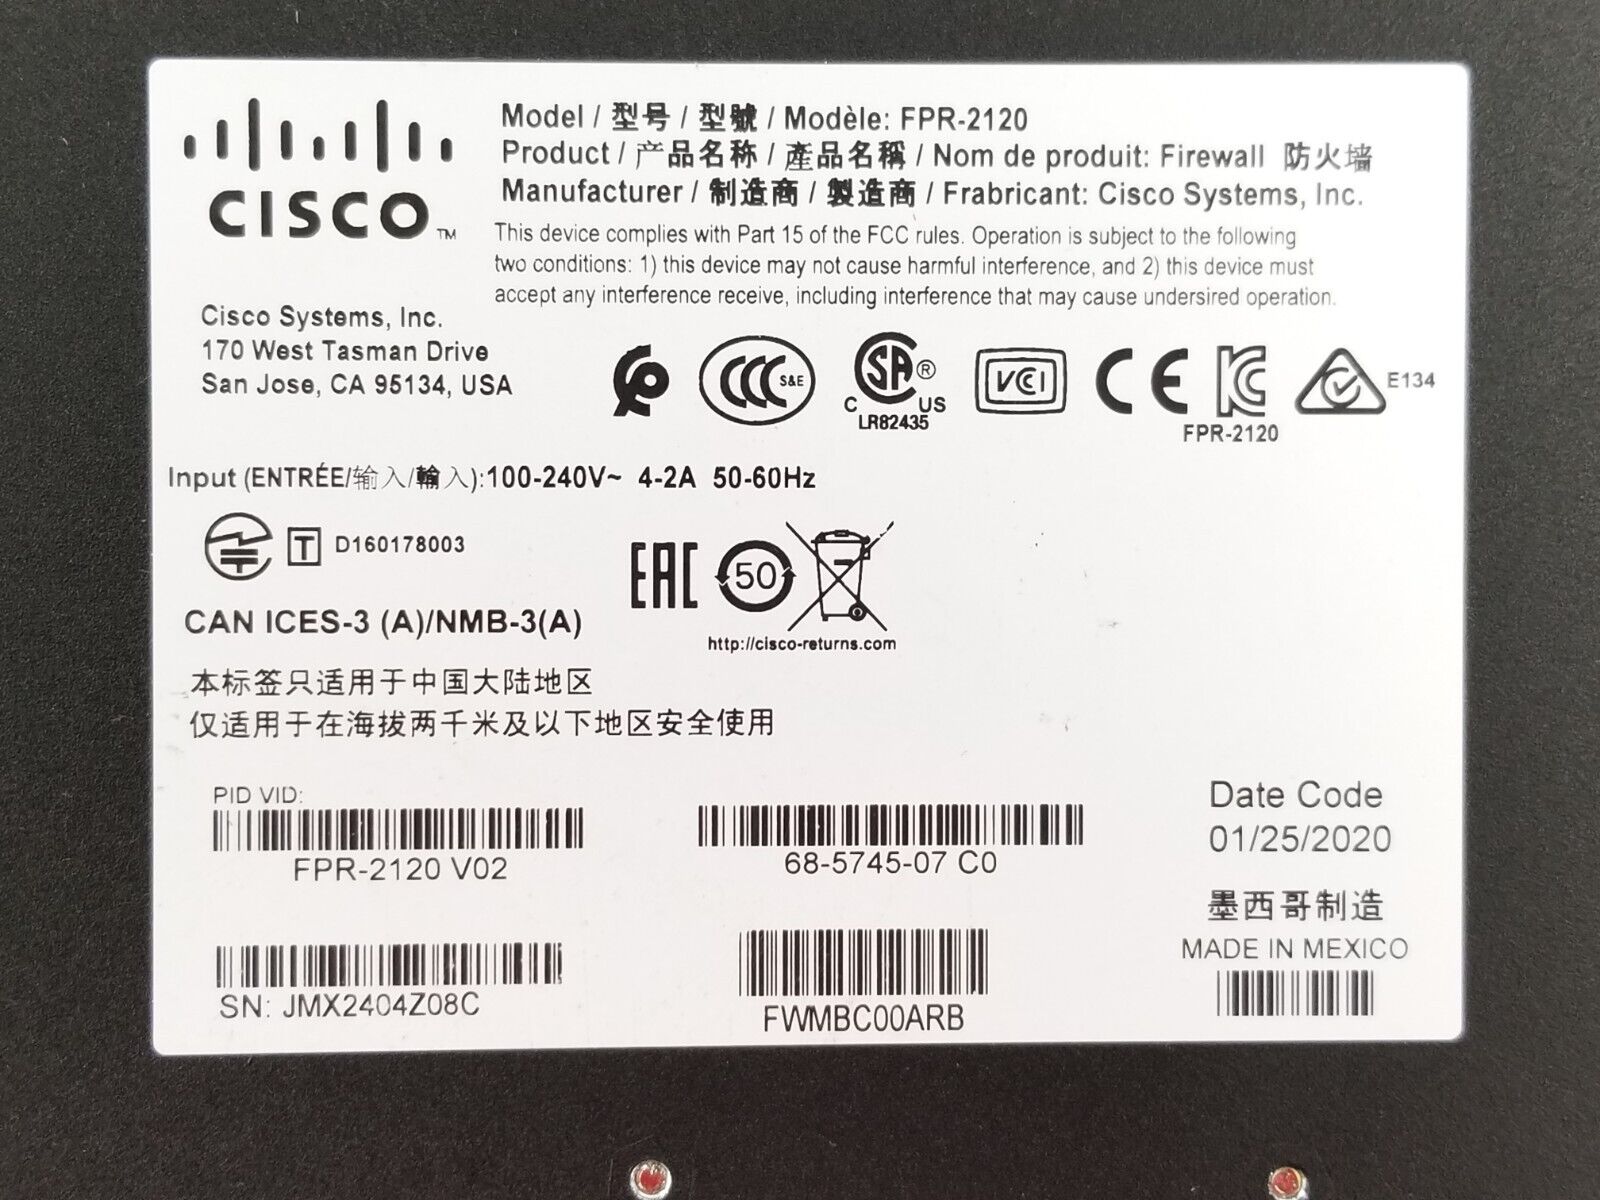 Cisco FPR-2120-NGFW-K9 FirePower 2100 Series Security Appliance